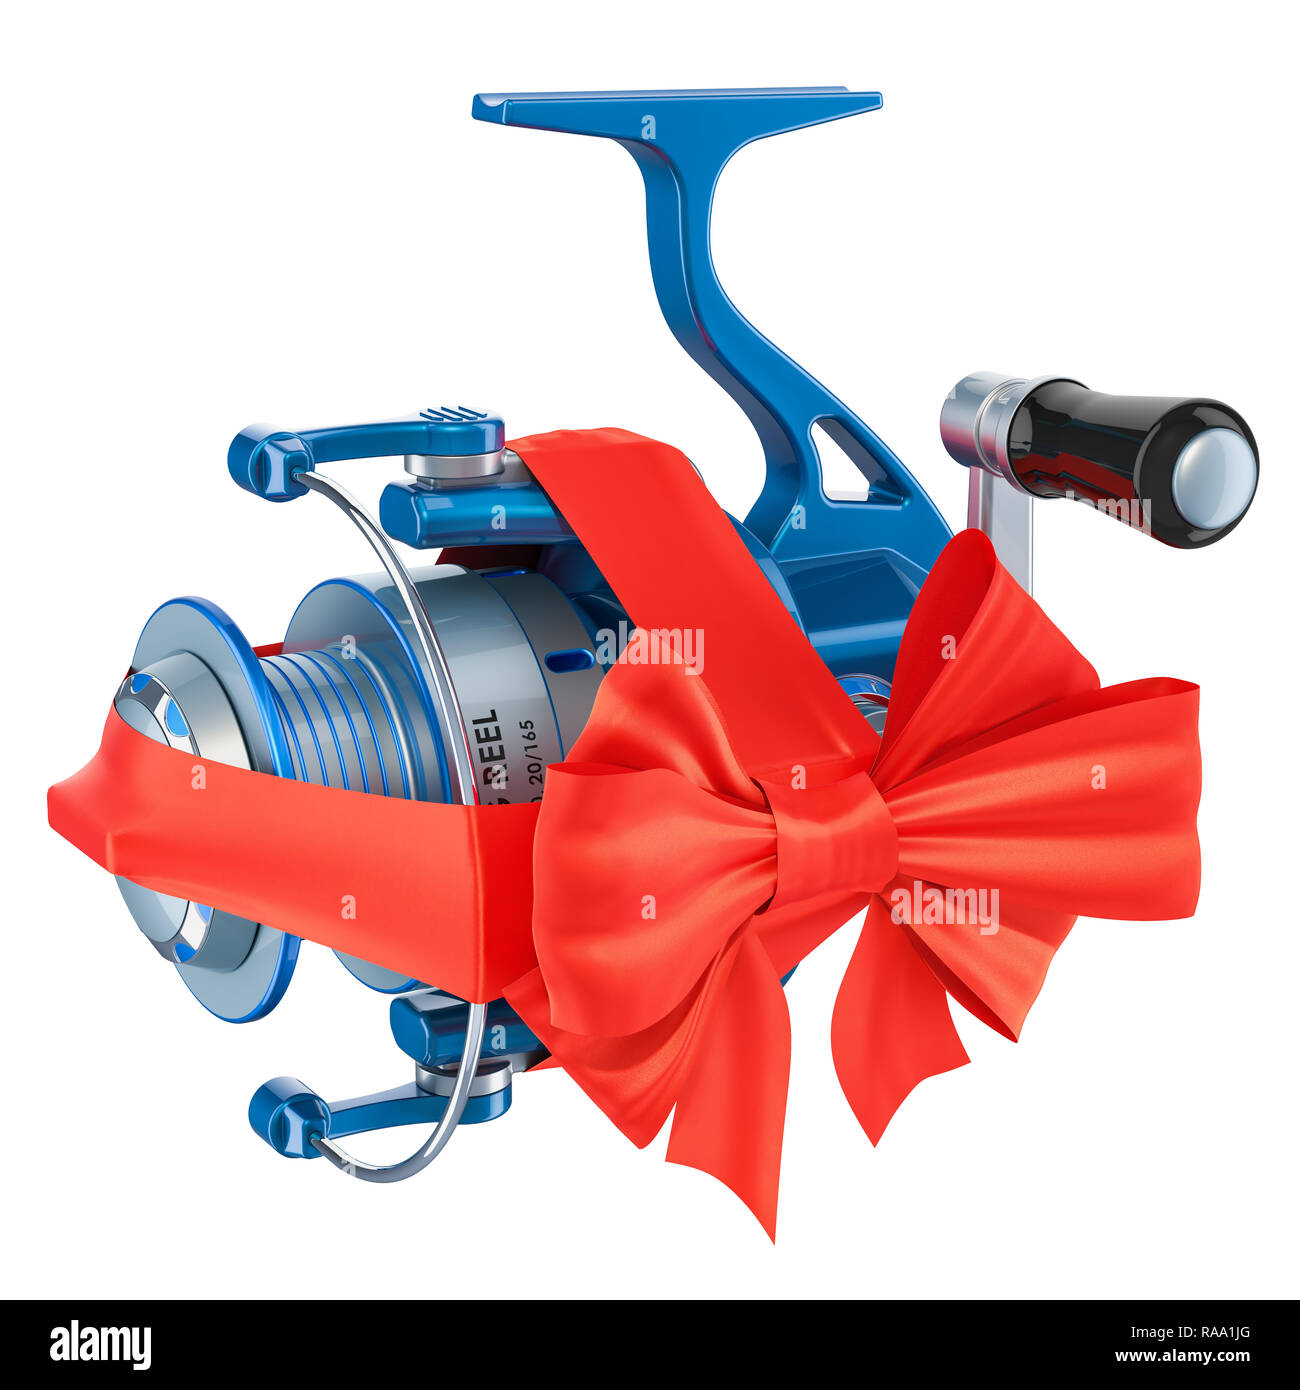 https://c8.alamy.com/comp/RAA1JG/spinning-reel-with-bow-and-ribbon-gift-concept-3d-rendering-isolated-on-white-background-RAA1JG.jpg